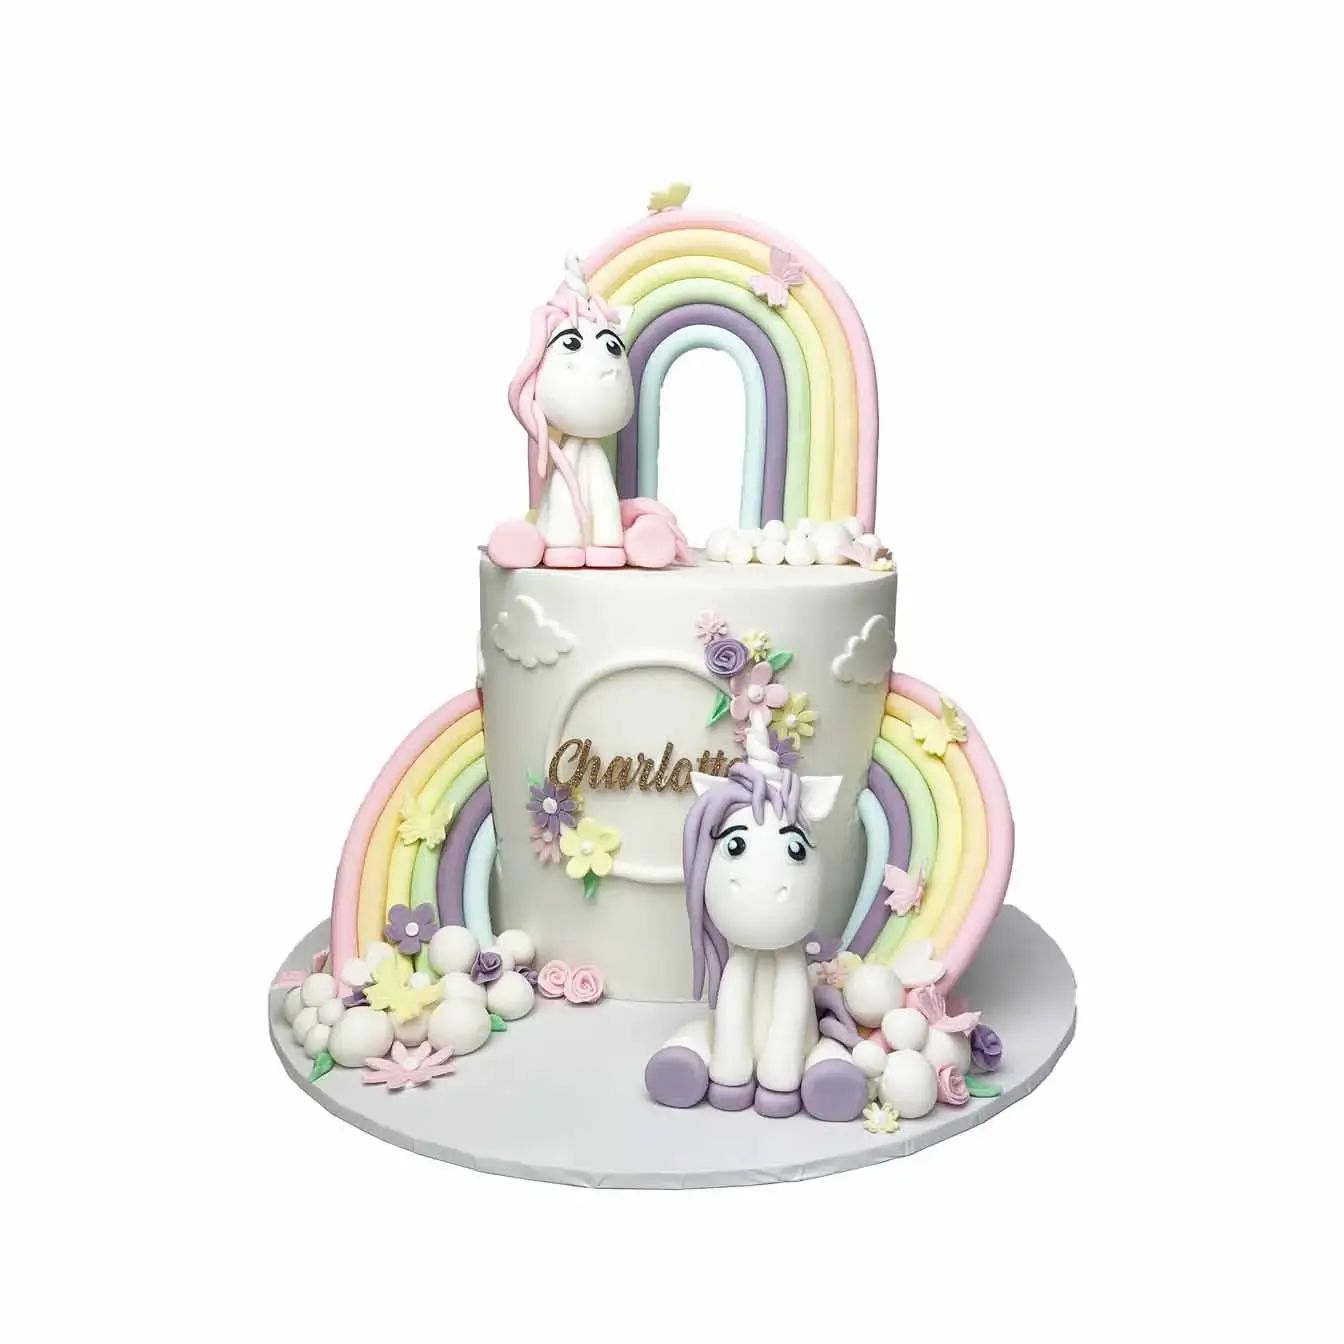 Enchanting Unicorn Wonderland Cake - A magical cake with rainbow molded slides, fluffy white clouds, and three molded unicorns, a perfect centerpiece for birthdays and celebrations of enchantment.